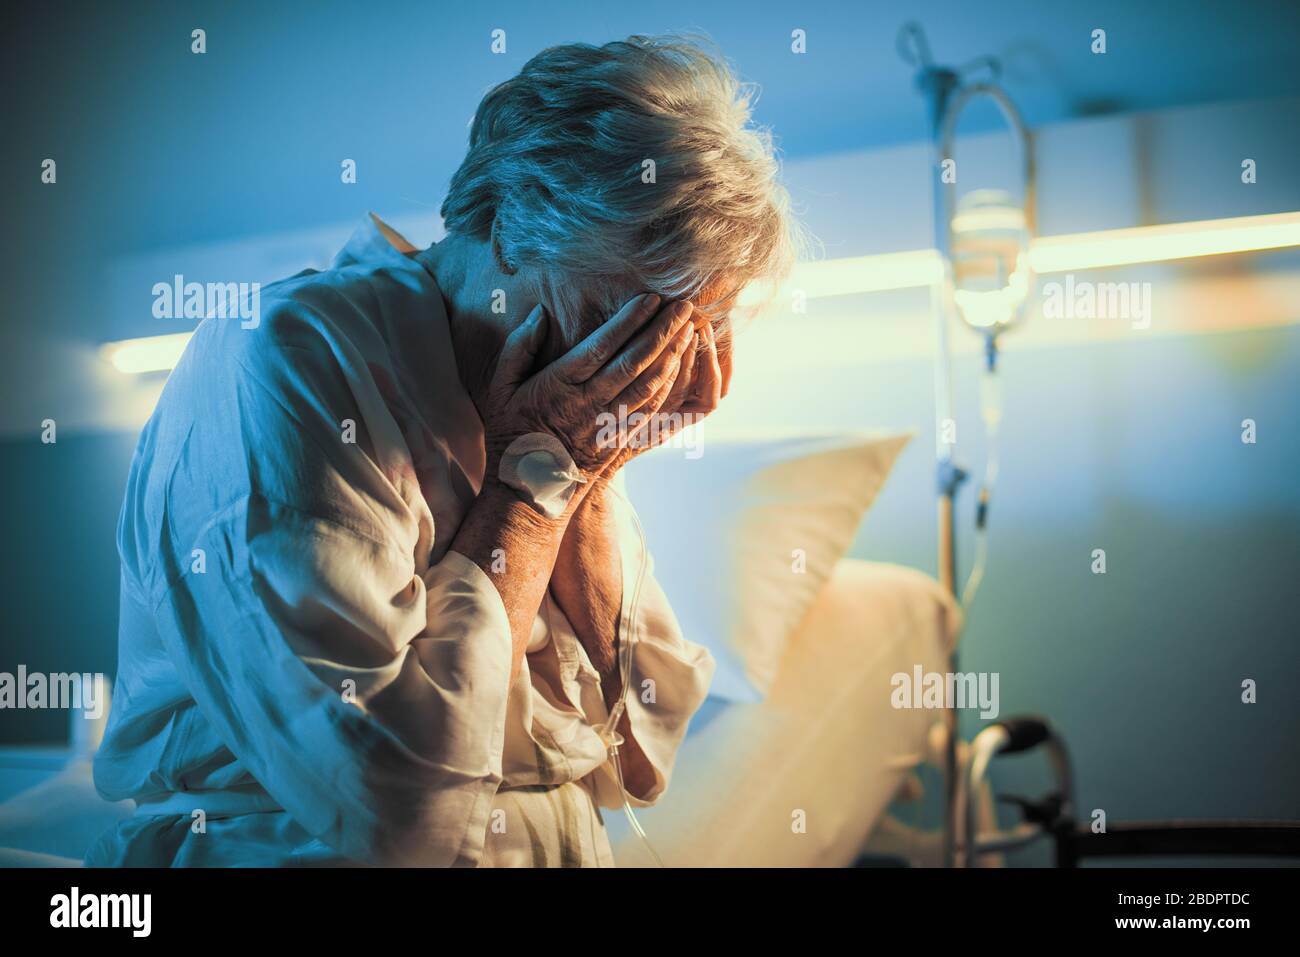 Lonely senior patient sitting on the hospital bed and crying with head in hands Stock Photo